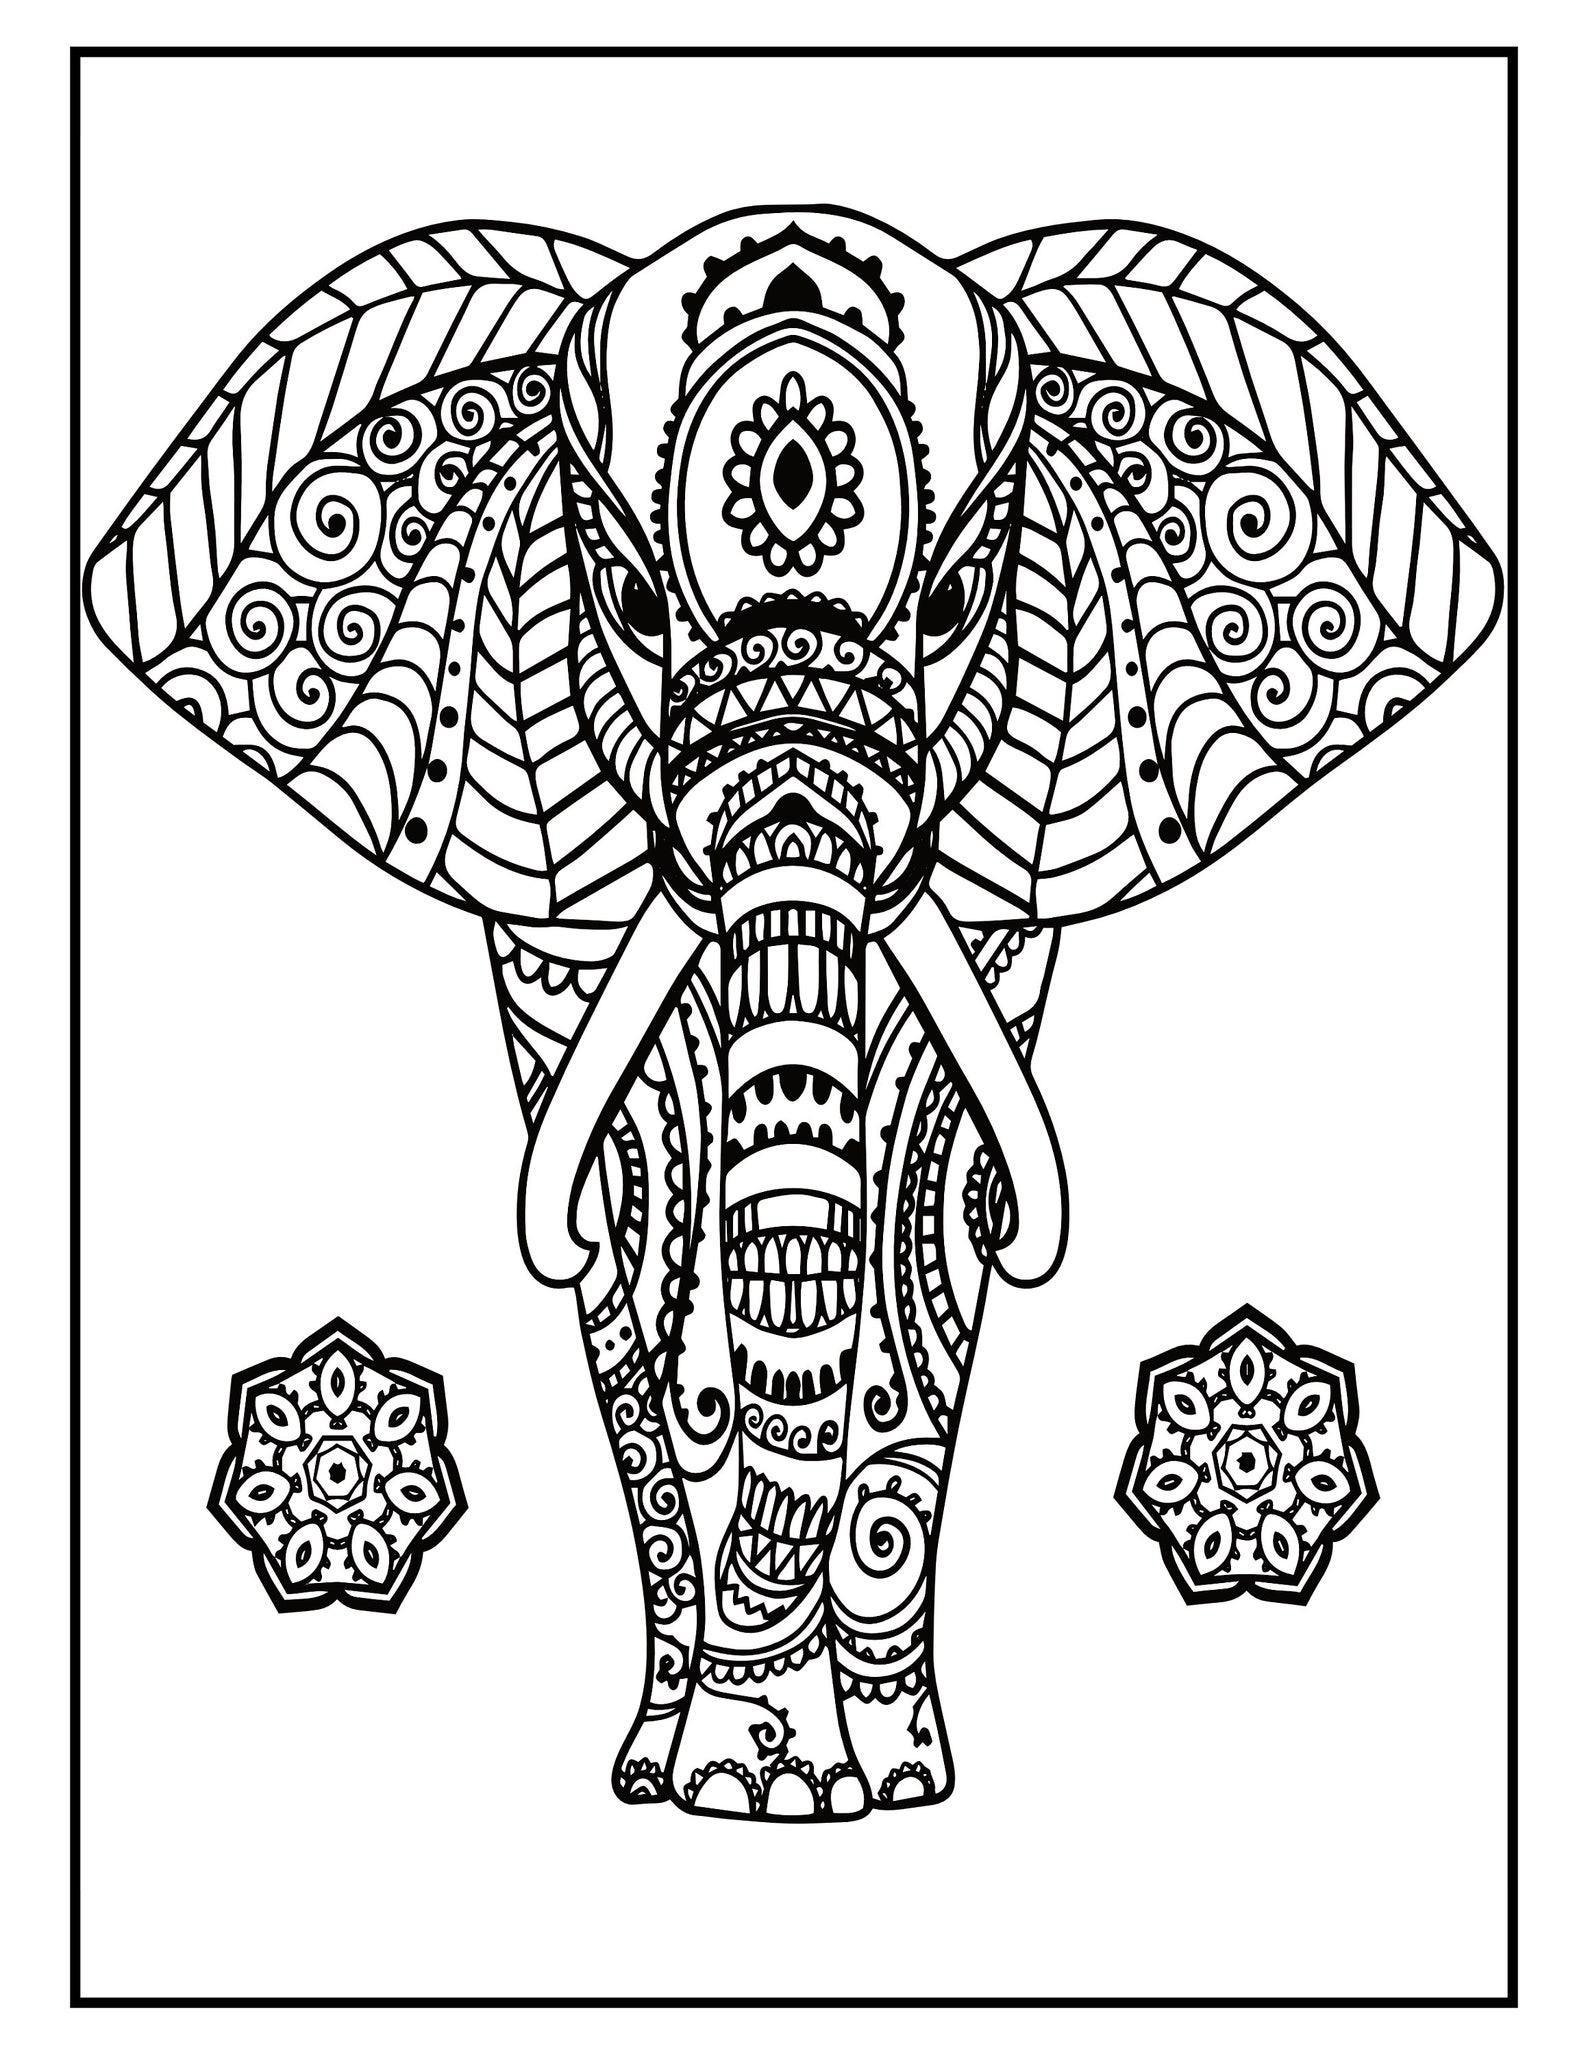 Elephant Mandala Coloring Pages 50 Page Elephant Coloring Book for ...